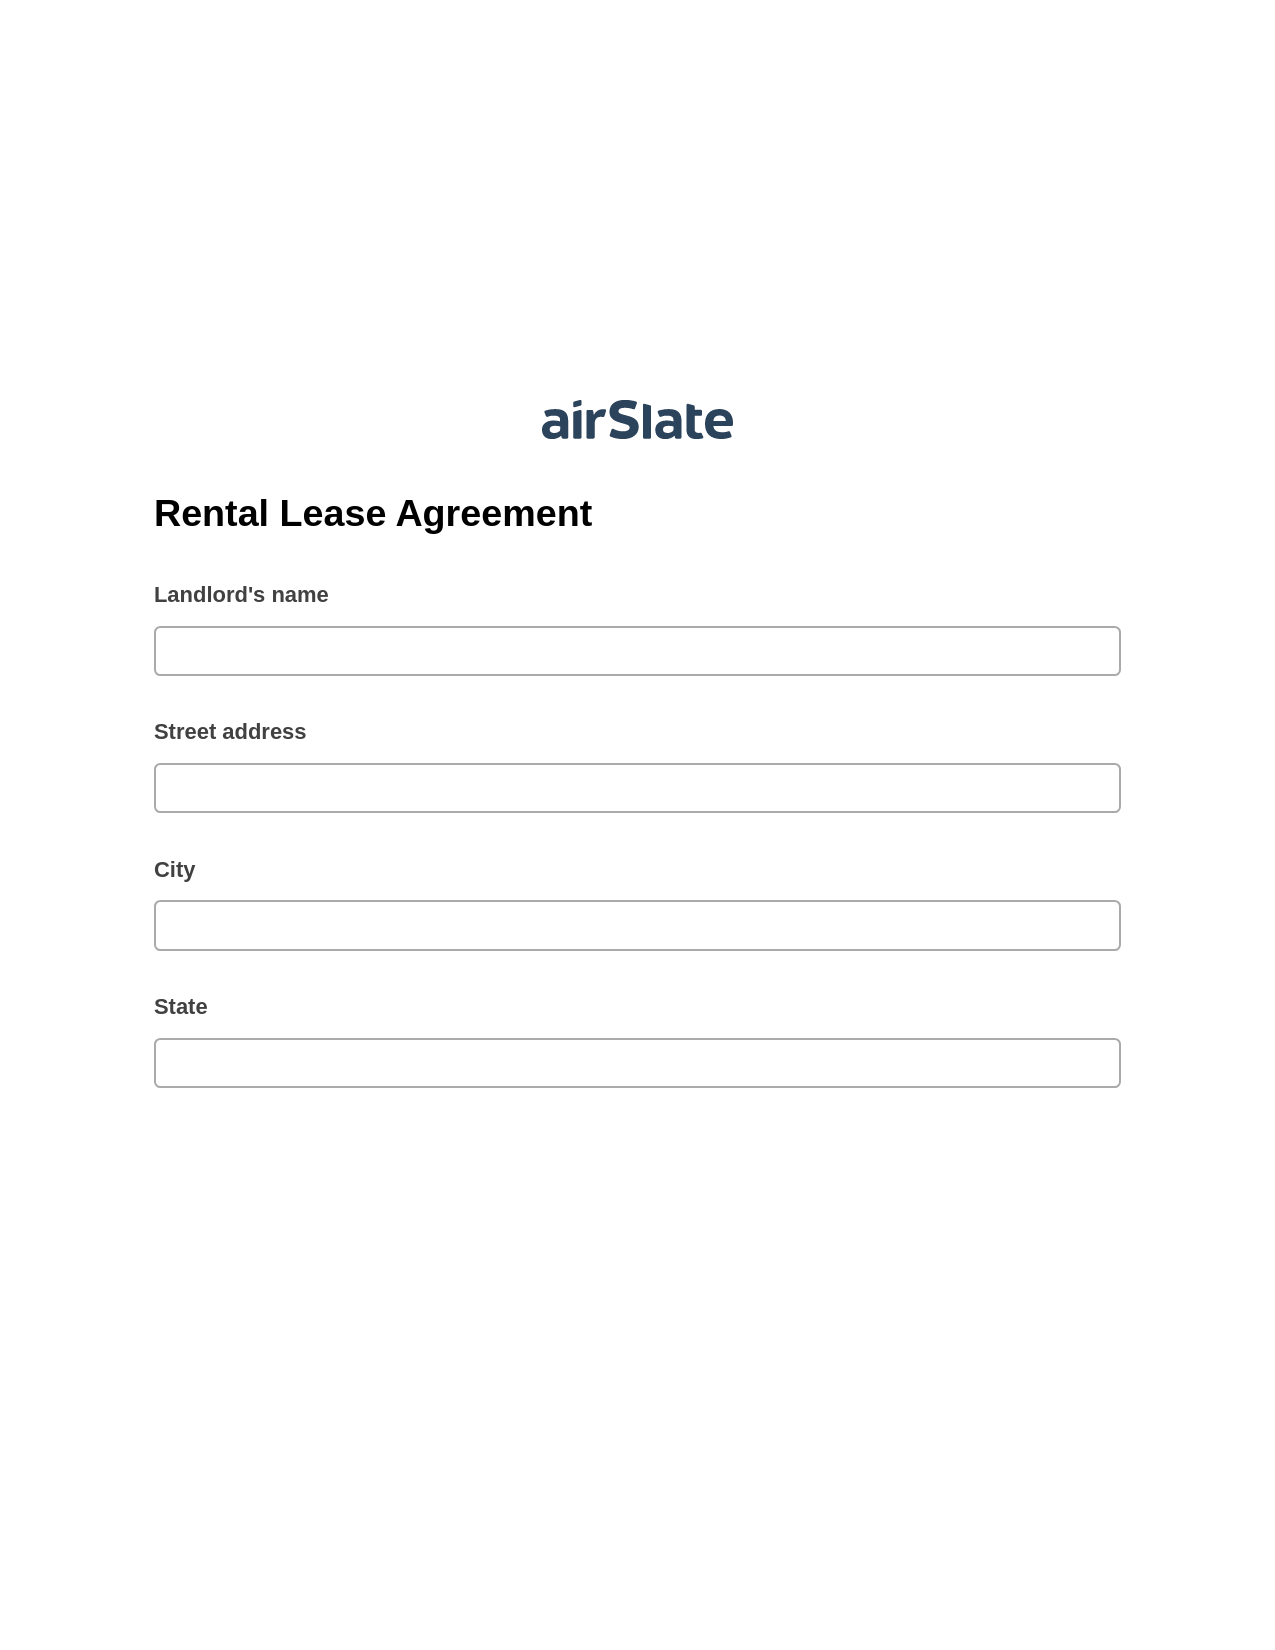 Rental Lease Agreement Pre-fill from Google Sheet Dropdown Options Bot, Create Slate from another Flow Bot, Slack Two-Way Binding Bot